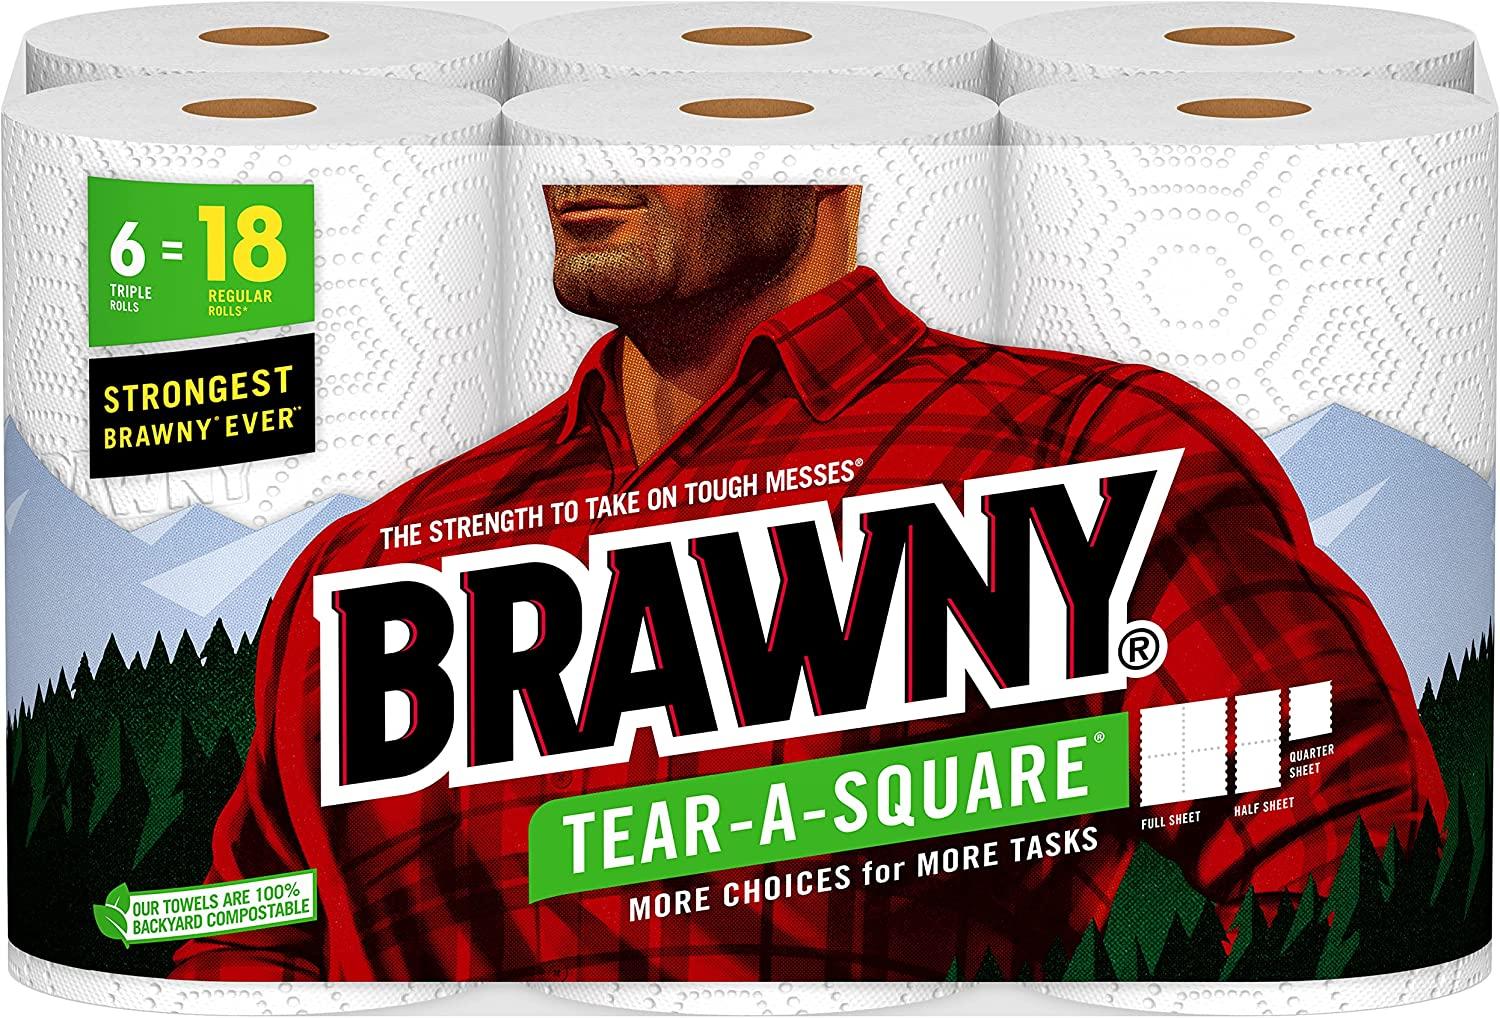 Triple Rolls Brawny Tear-A-Square 2-Ply Paper Towels 6 Pack for $13.65 Shipped